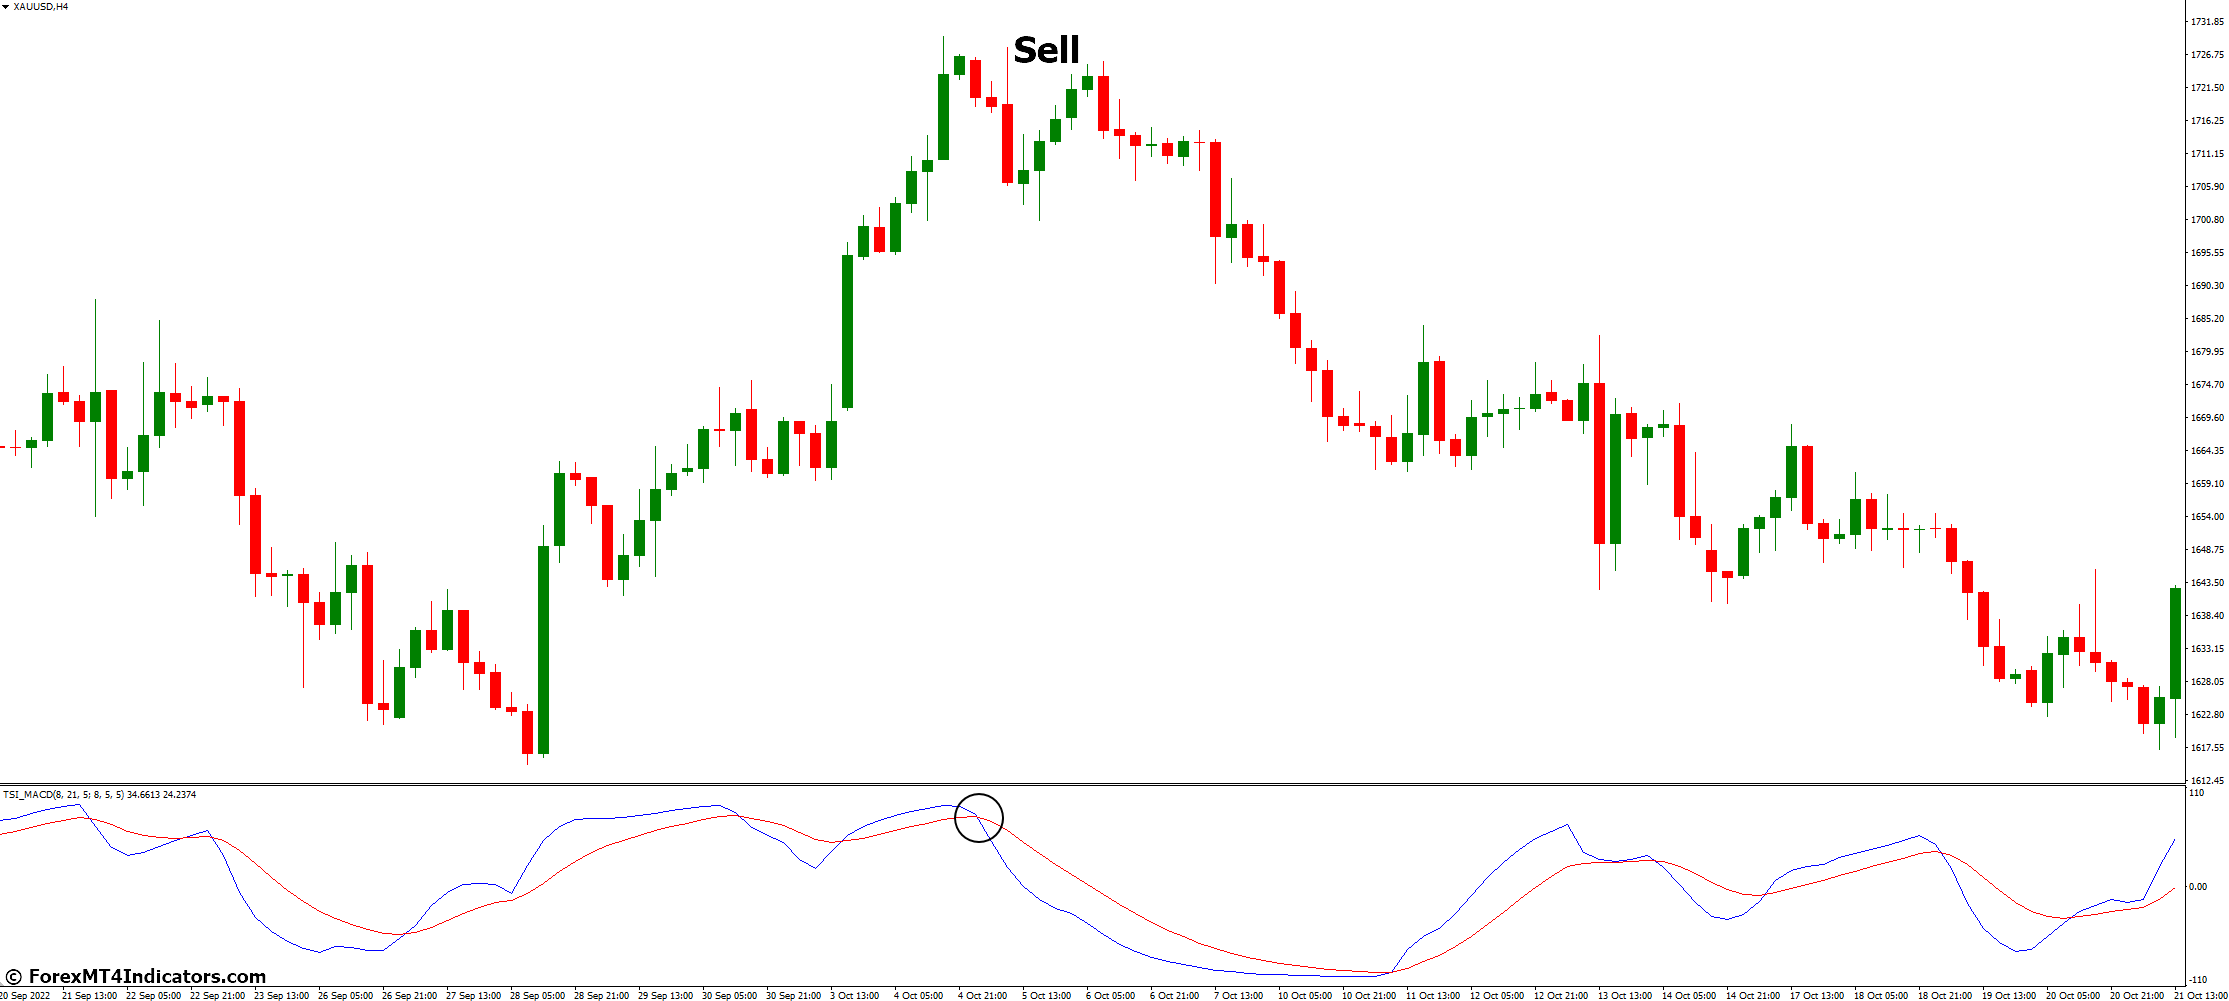 How to Trade with TSI MACD MT4 Indicator - Sell Entry